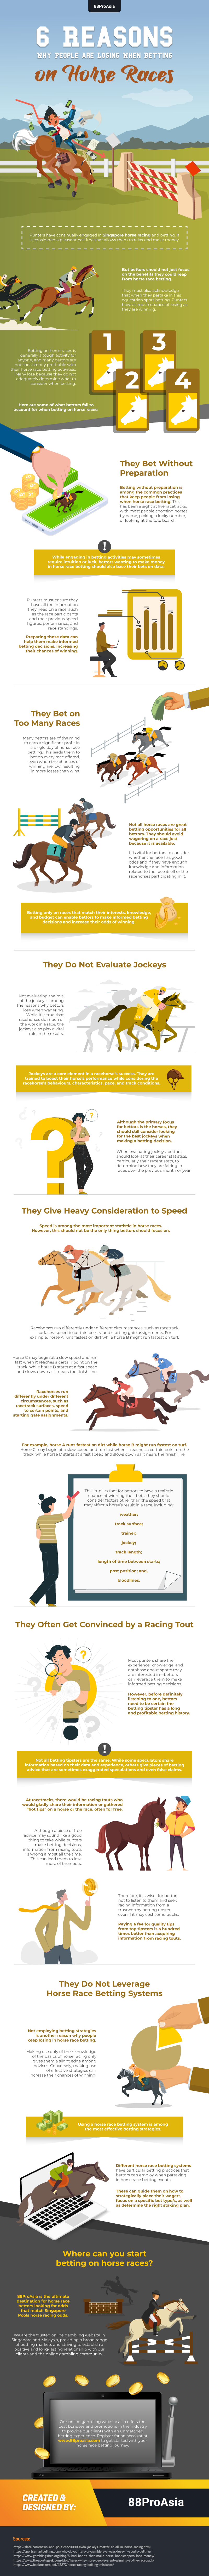 6 -Reasons-Why-People-are-Losing-When-Betting-on-Horse-Races-awmdns1312